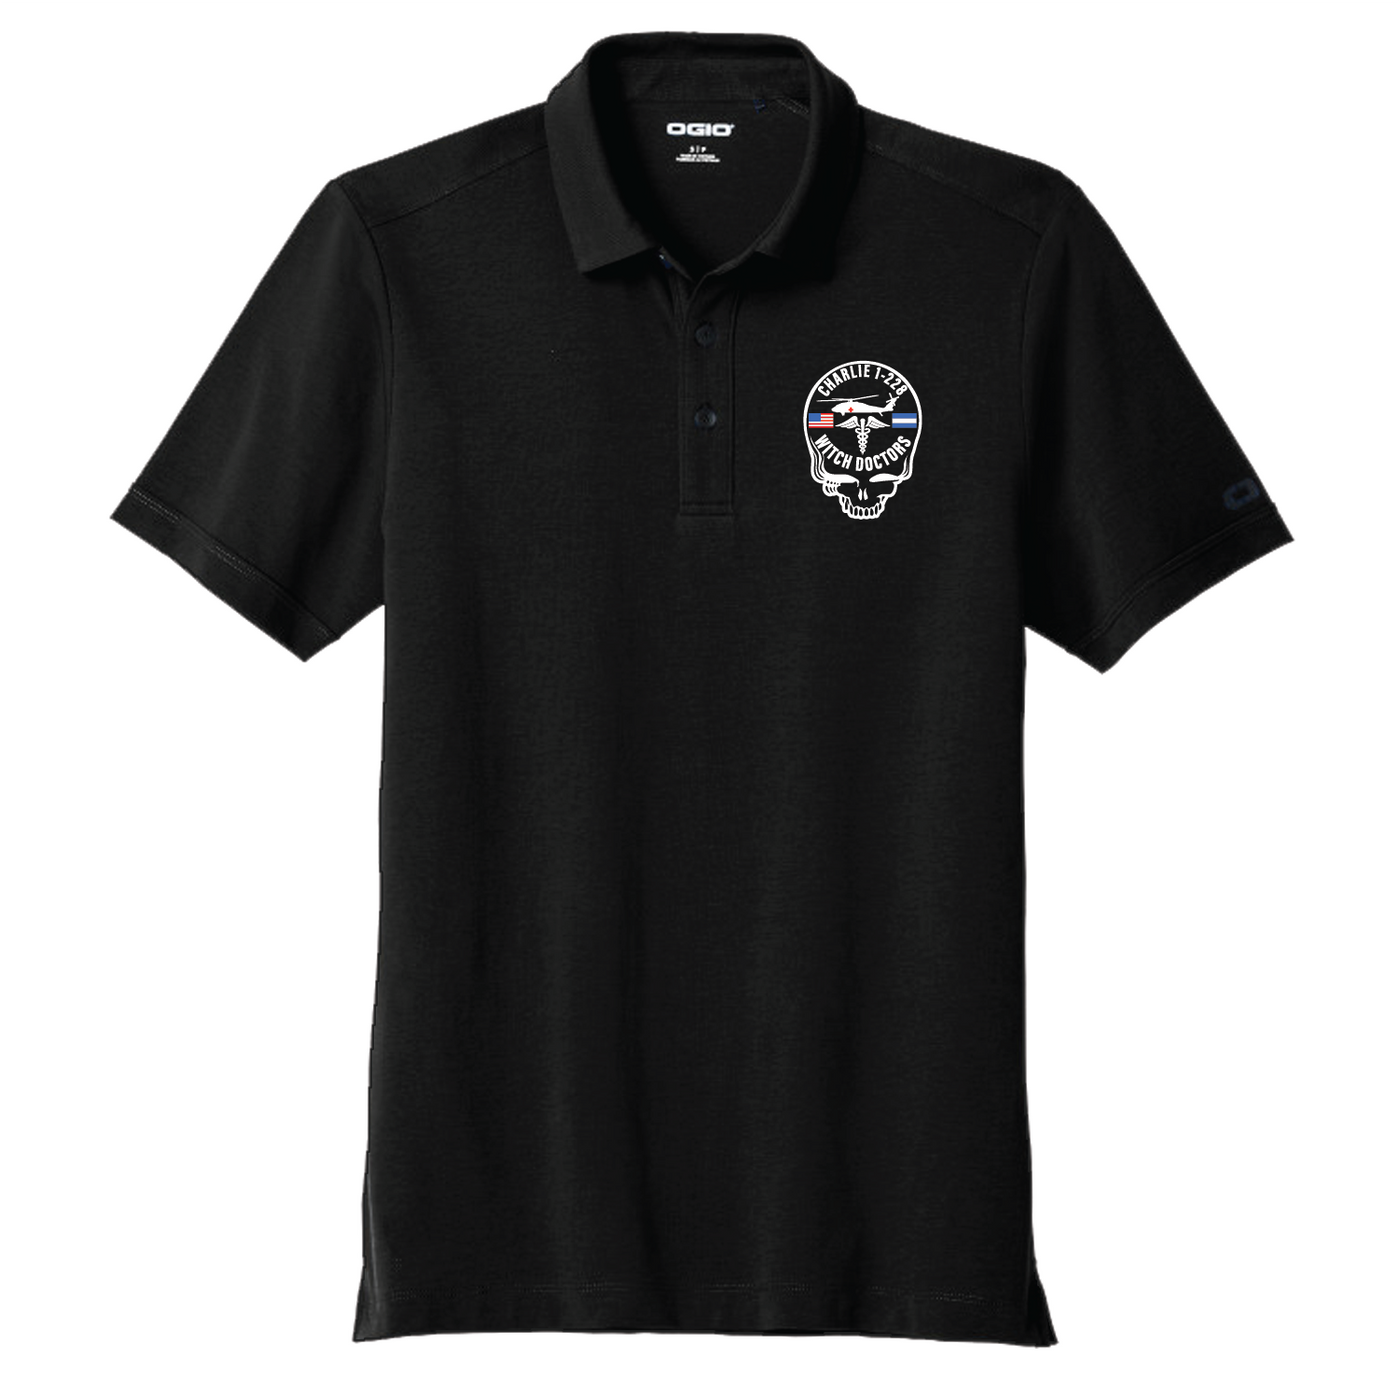 USAAAD C Co, 1-228 "Witchdoctors" 2023 Polo